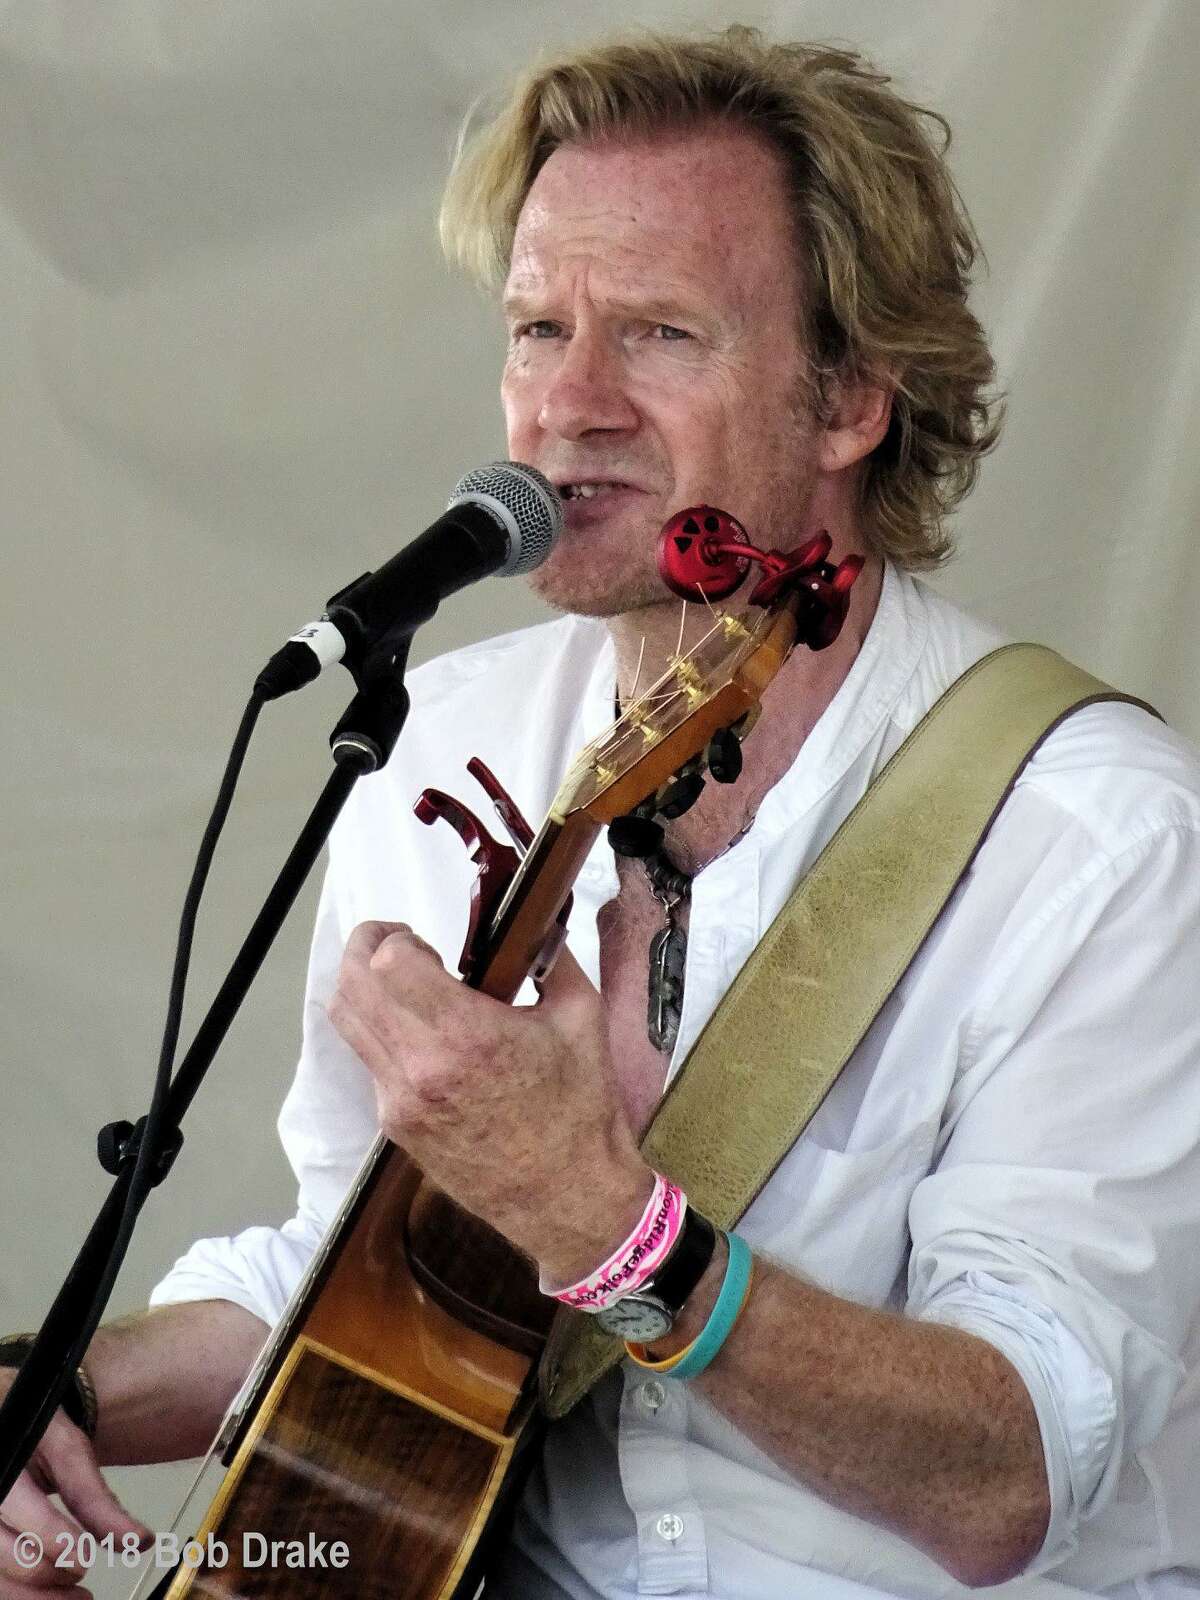 Traveling troubadour Rupert Wates appears at Voices Cafe in Westport at 8 p.m. Saturday, Dec. 8.